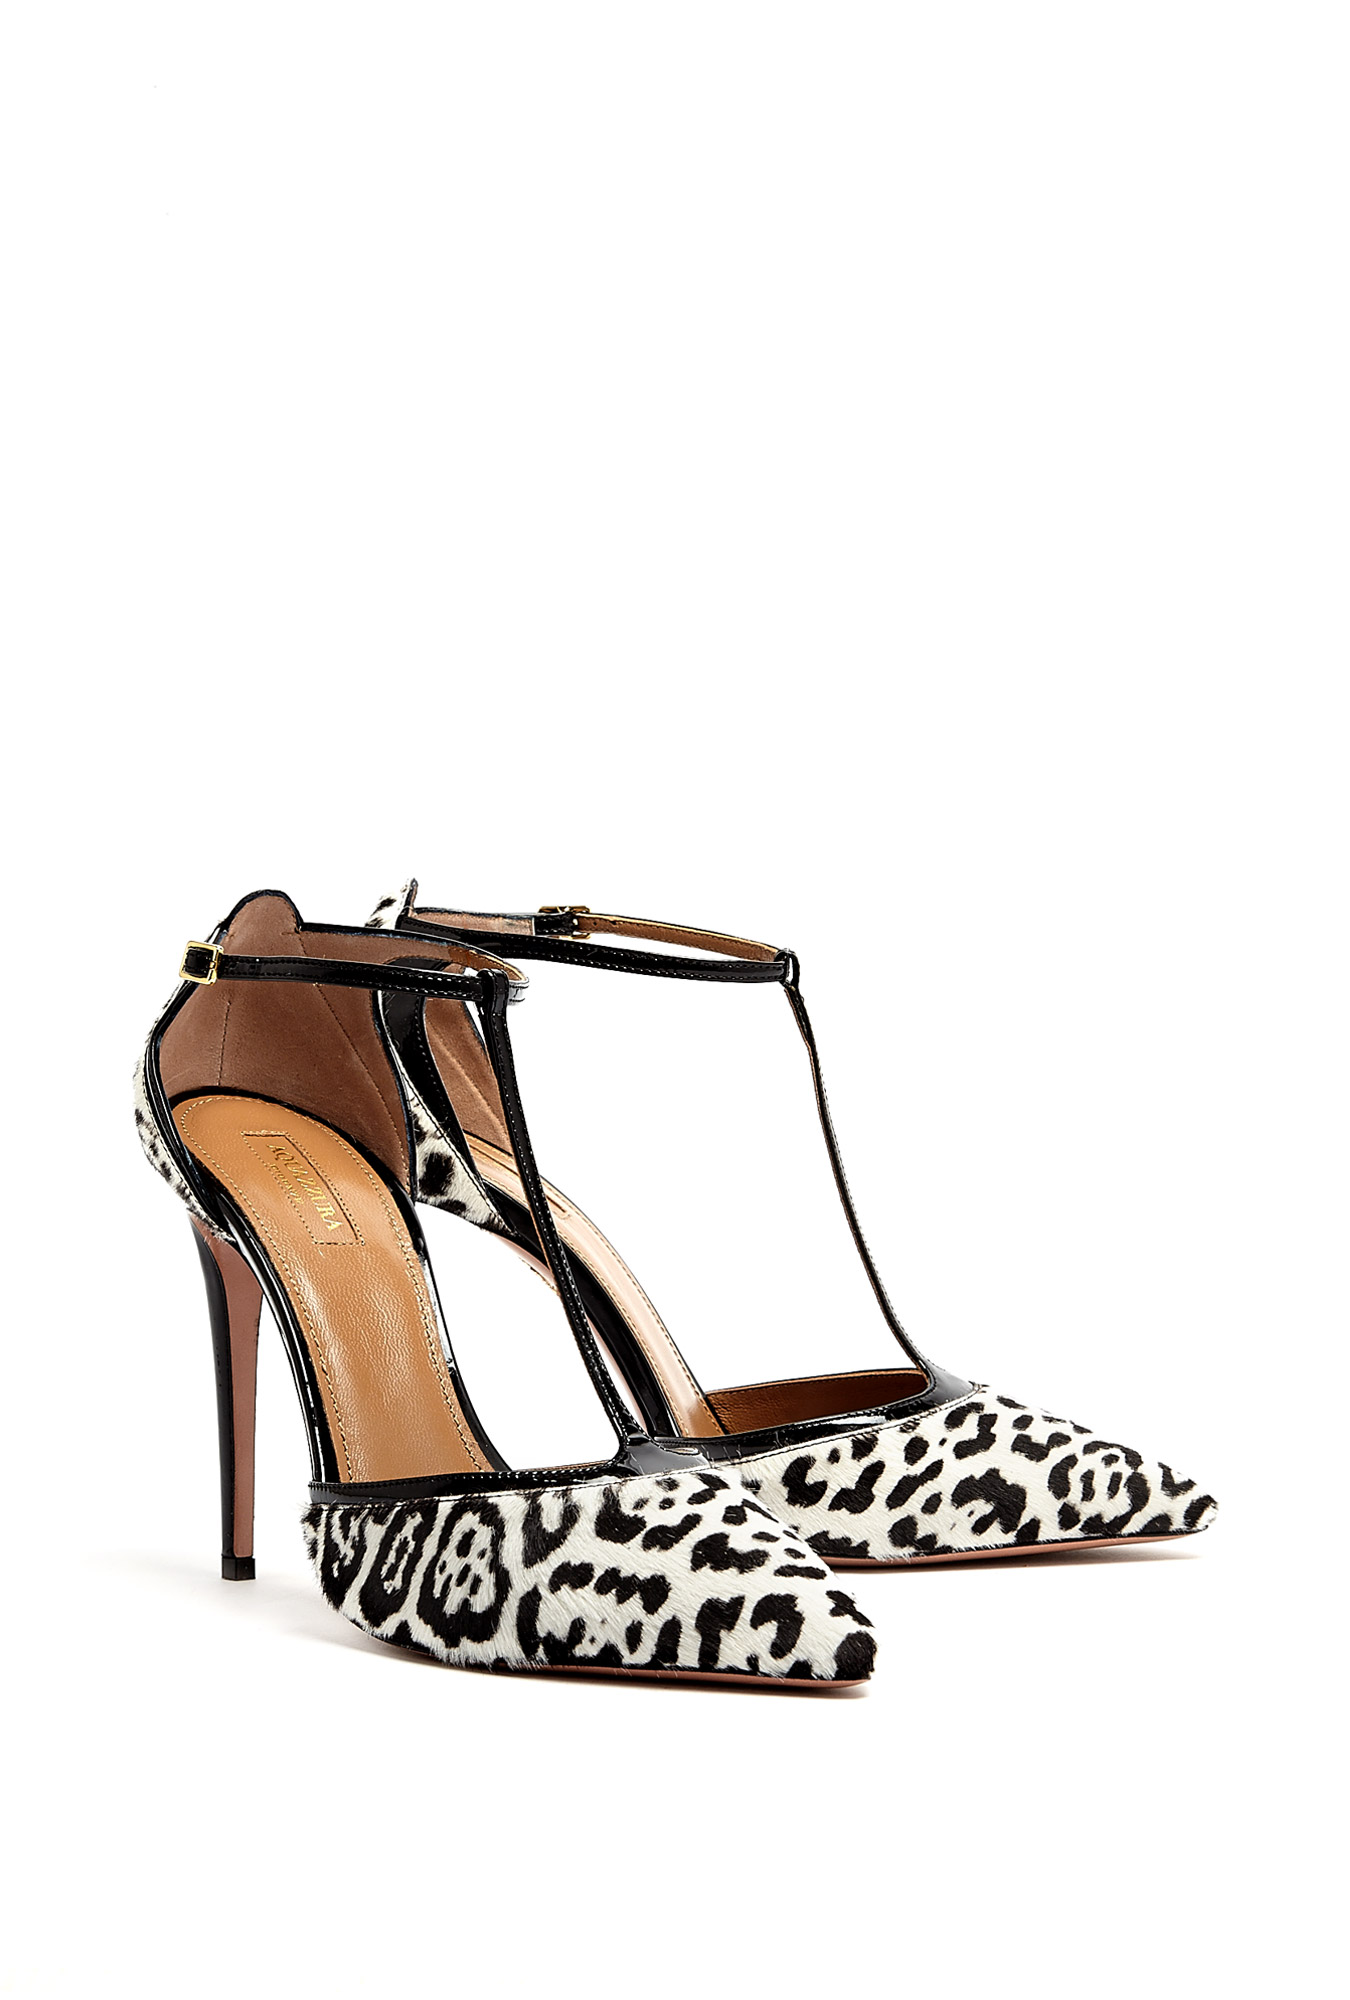 Aquazzura Tango T-strap Leopard Pointed Court Shoes in Animal (leopard ...